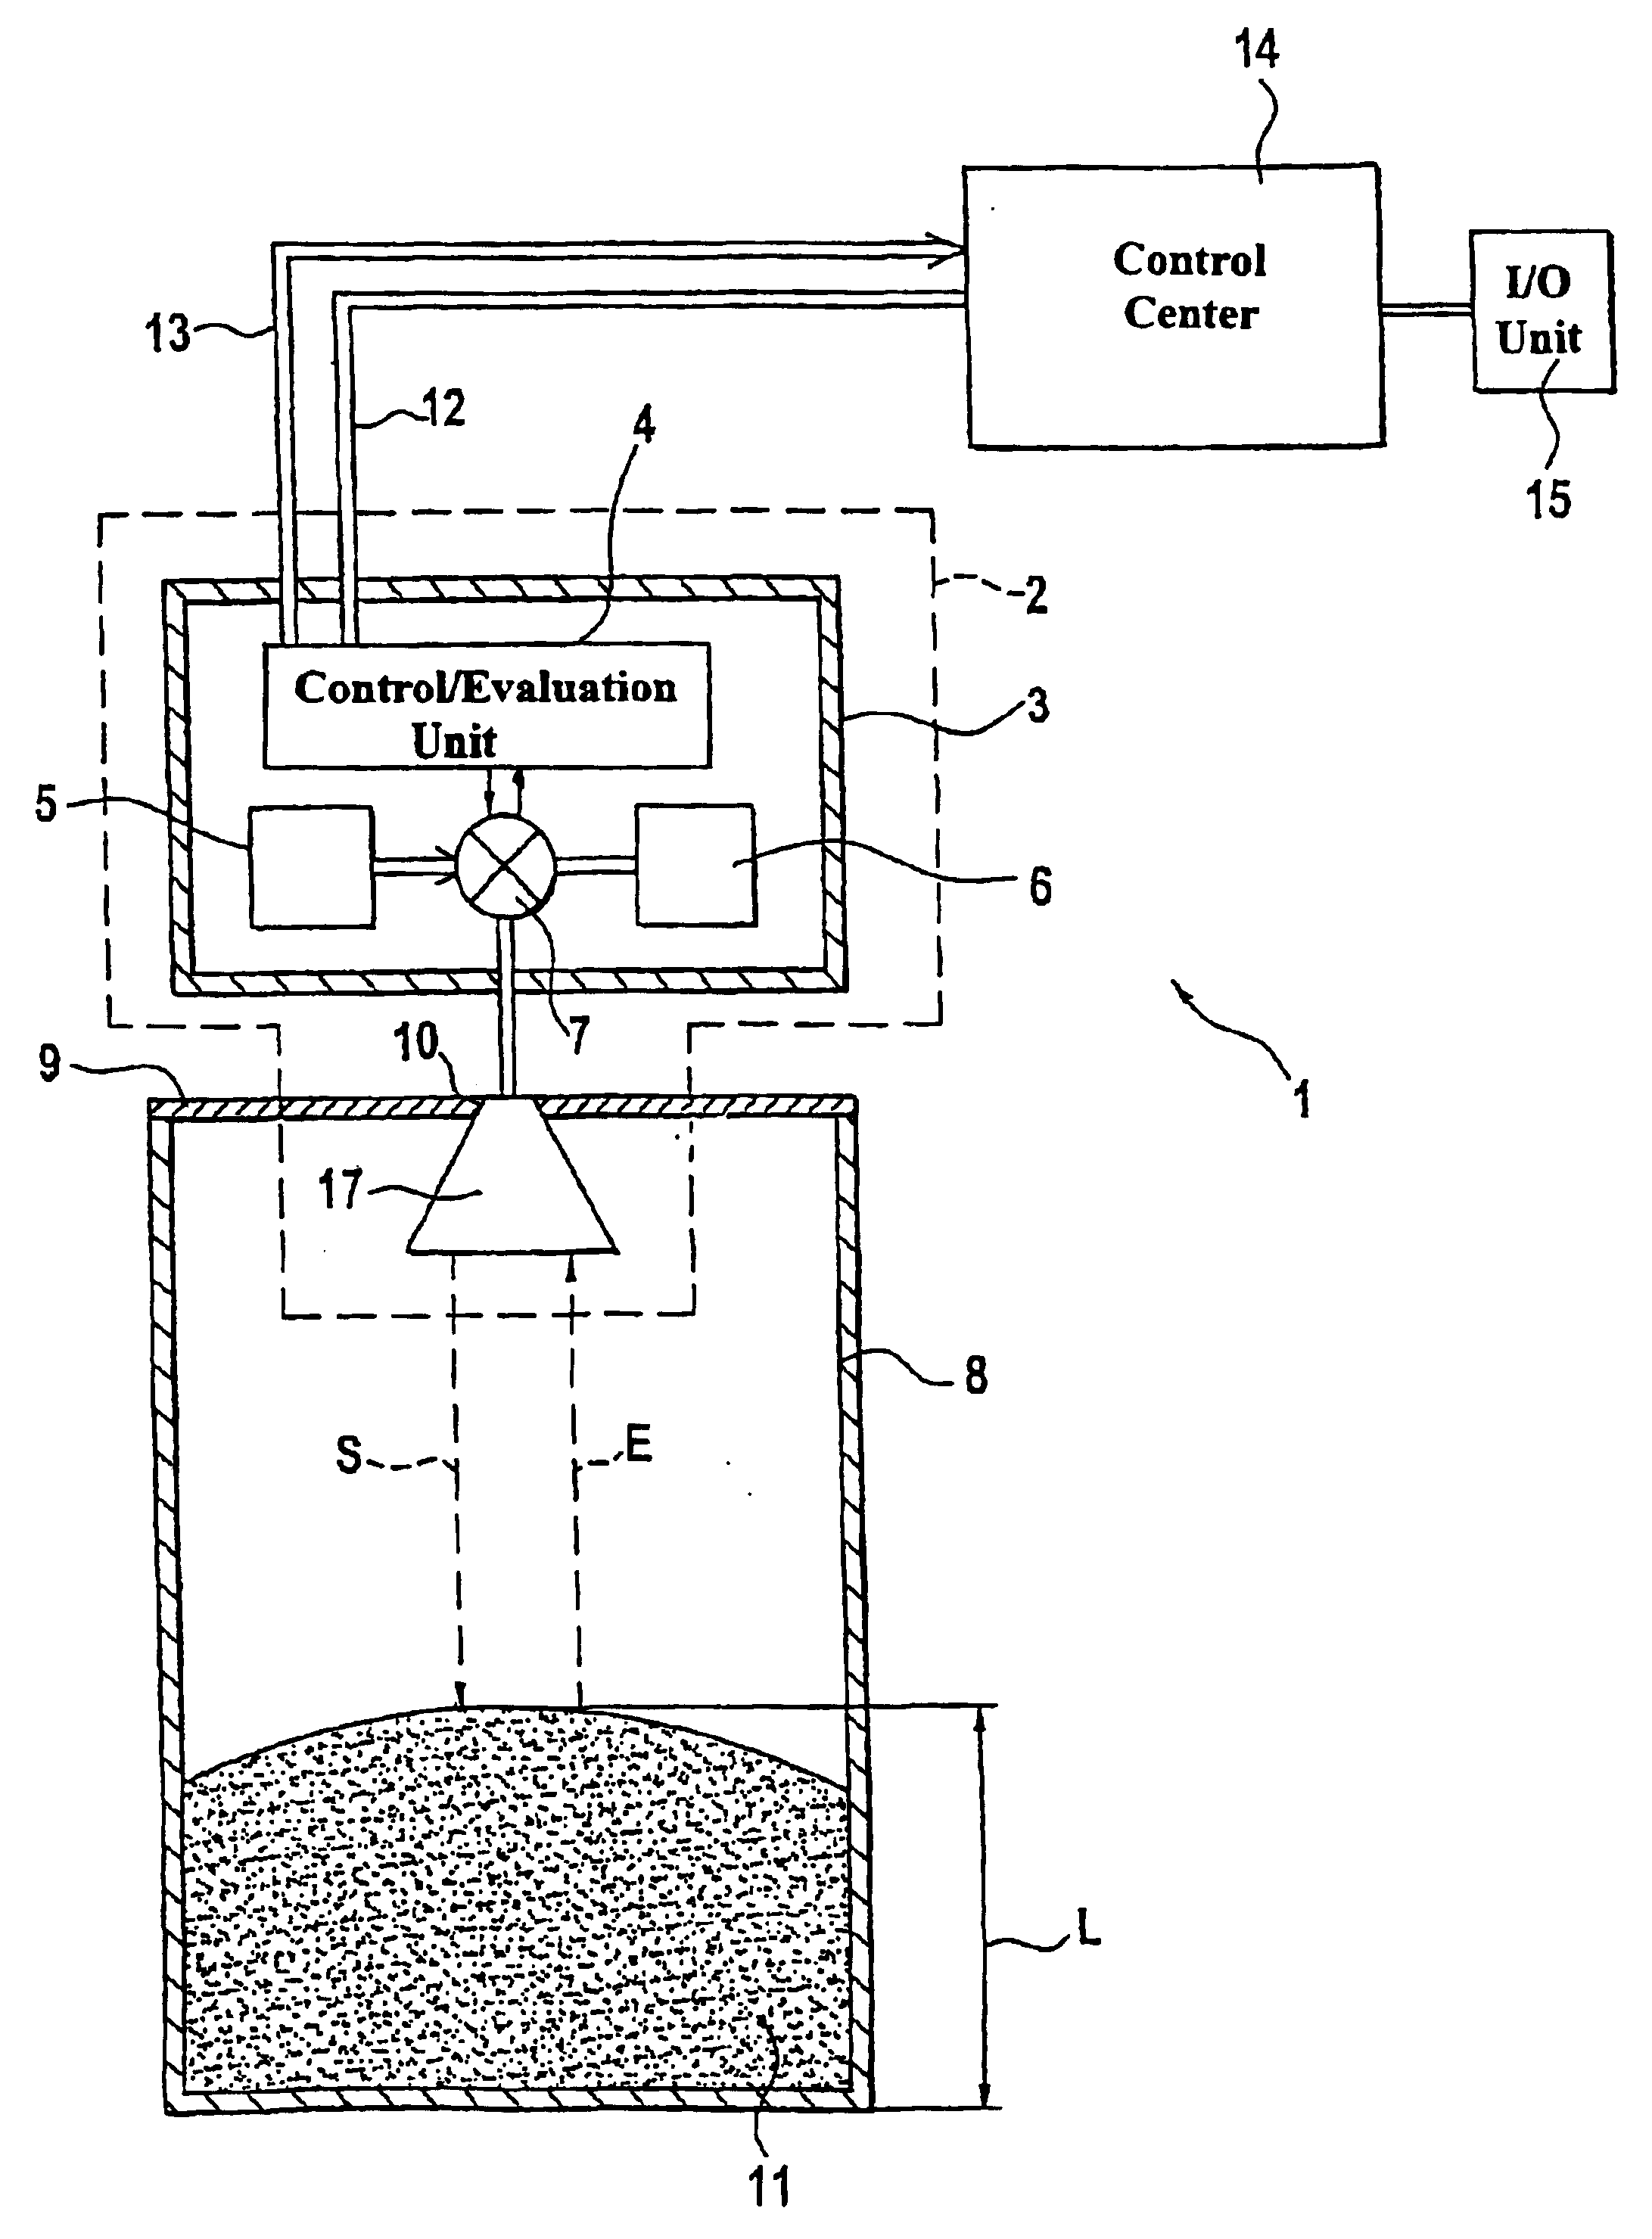 Device for the measurement and monitoring of a process parameter